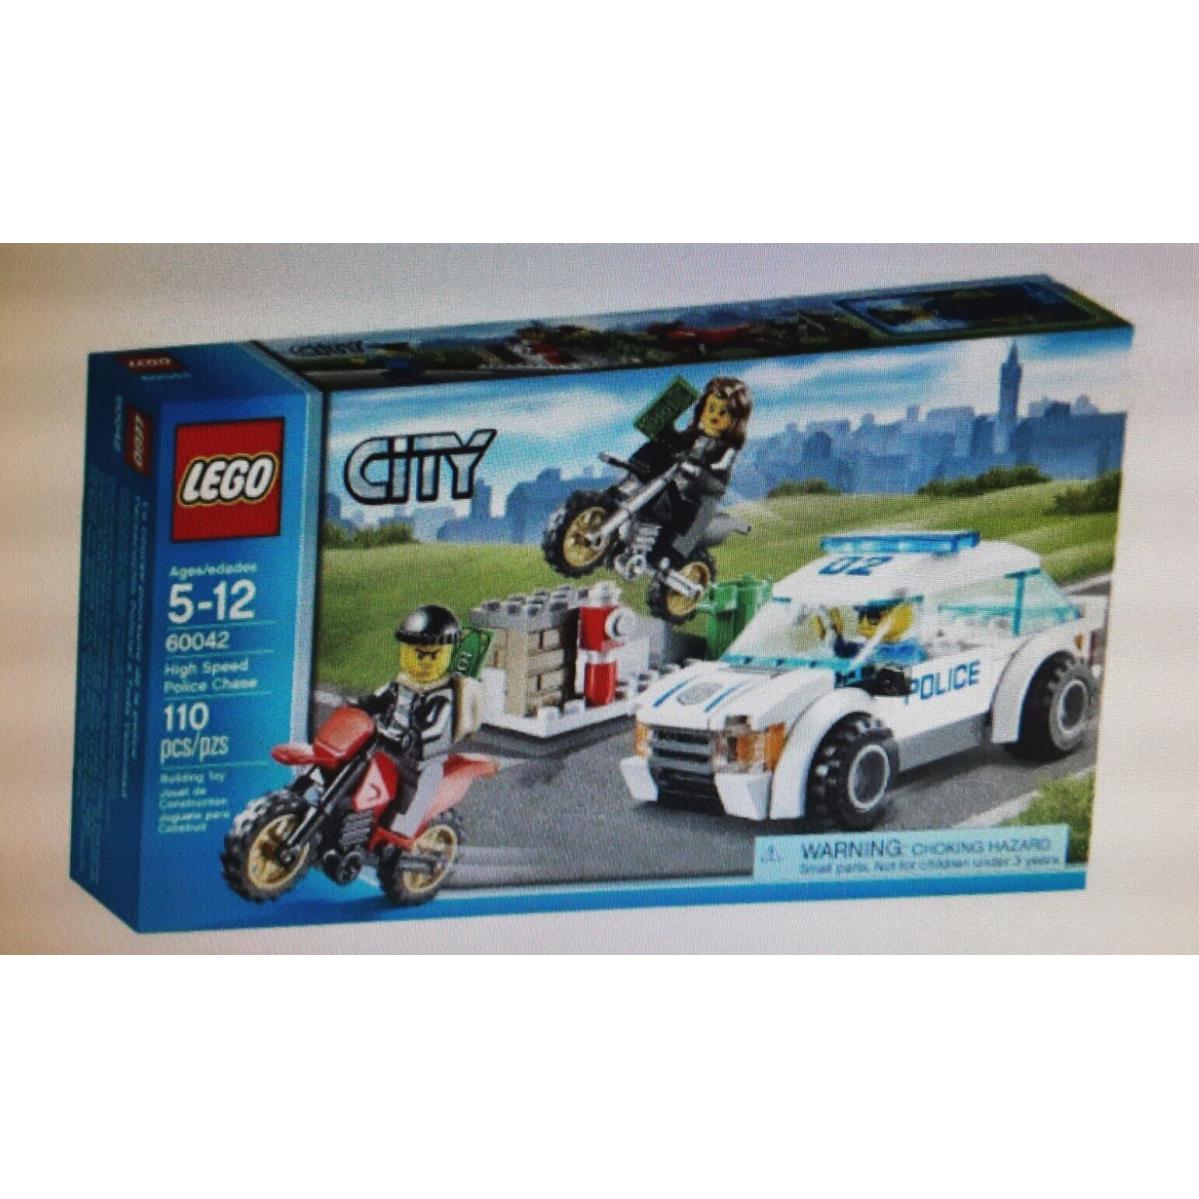 Lego 60042 City - High Speed Police Chase